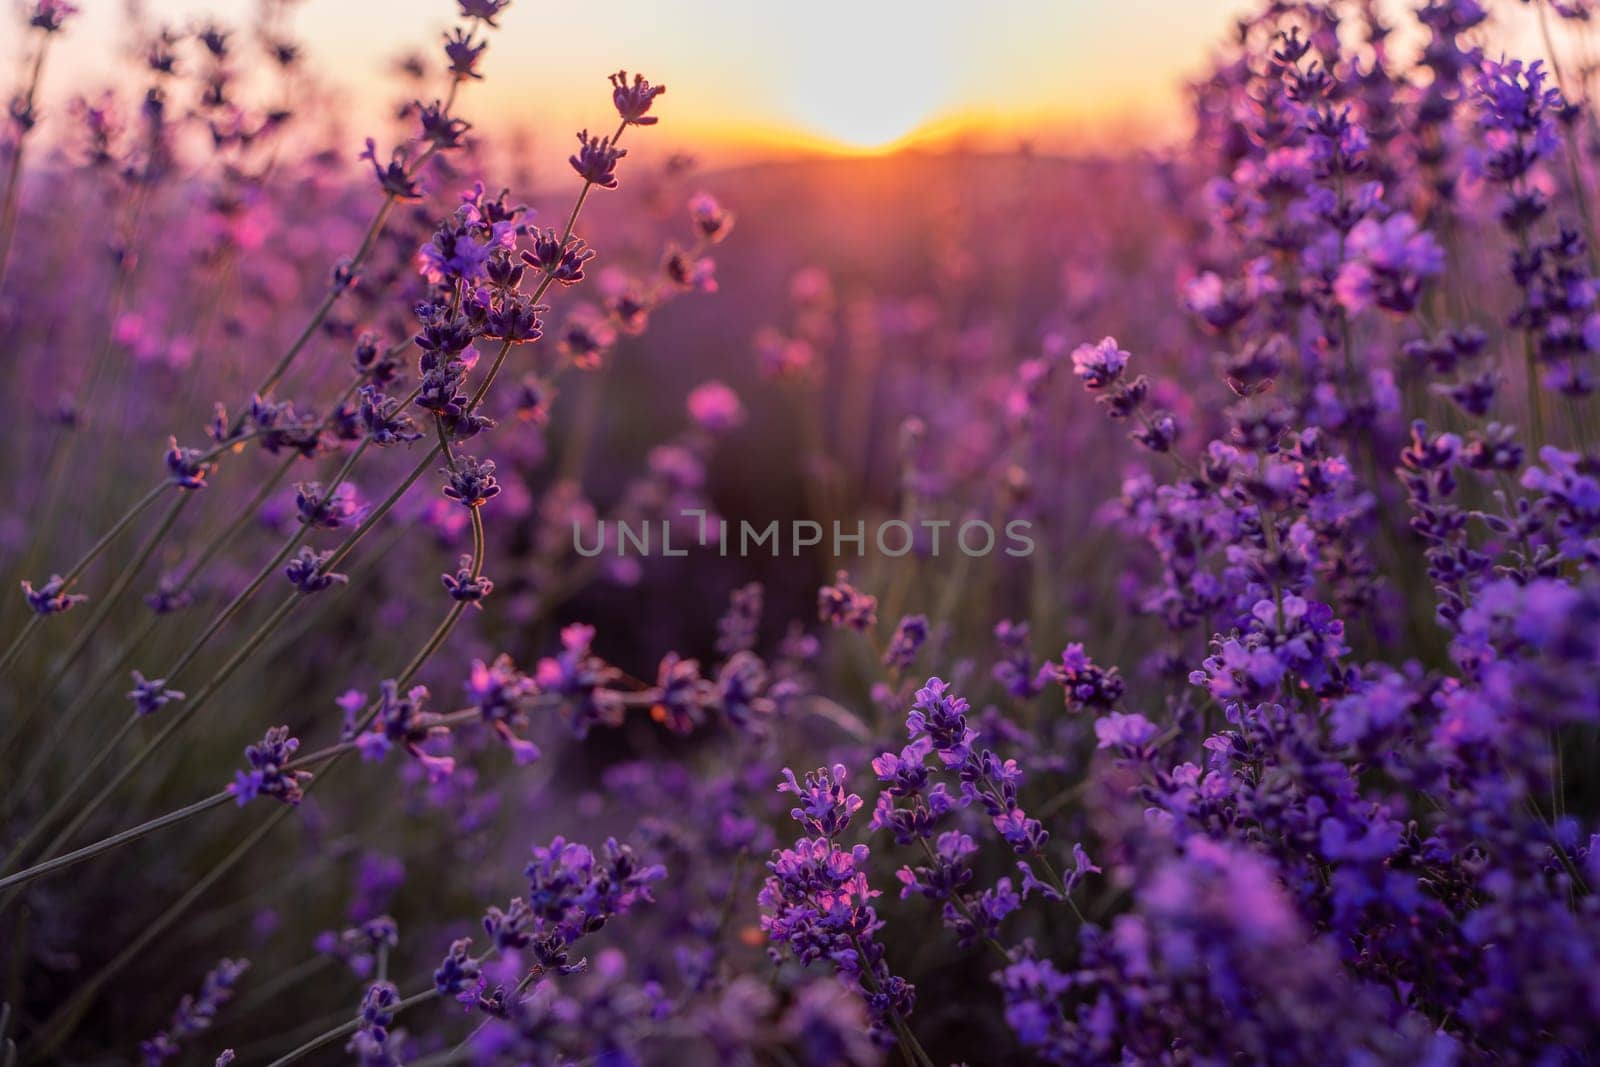 Blooming lavender in a field at in Provence. Fantastic summer mood, floral sunset landscape of meadow lavender flowers. Peaceful bright and relaxing nature scenery